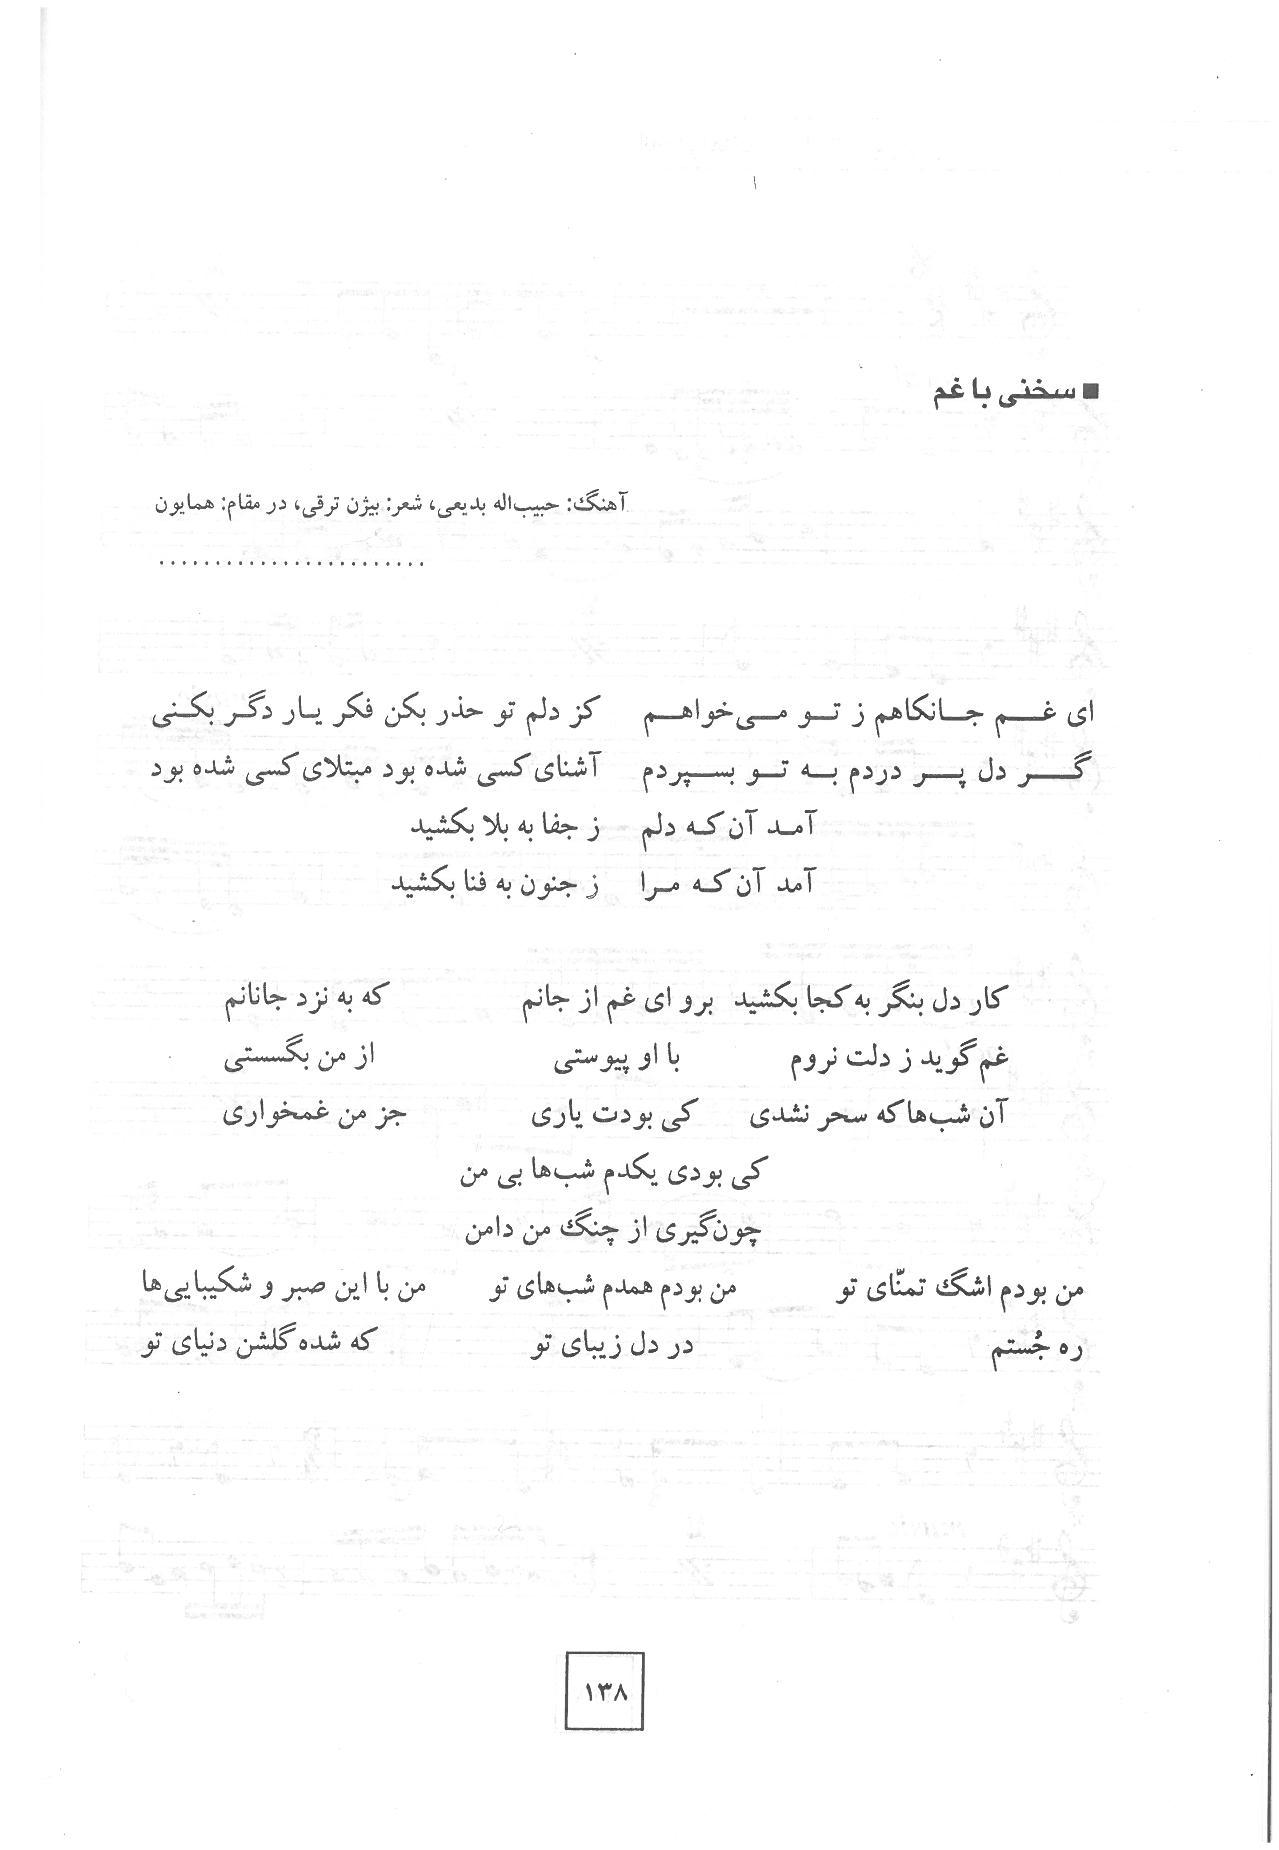 A page of an arabic language letter.